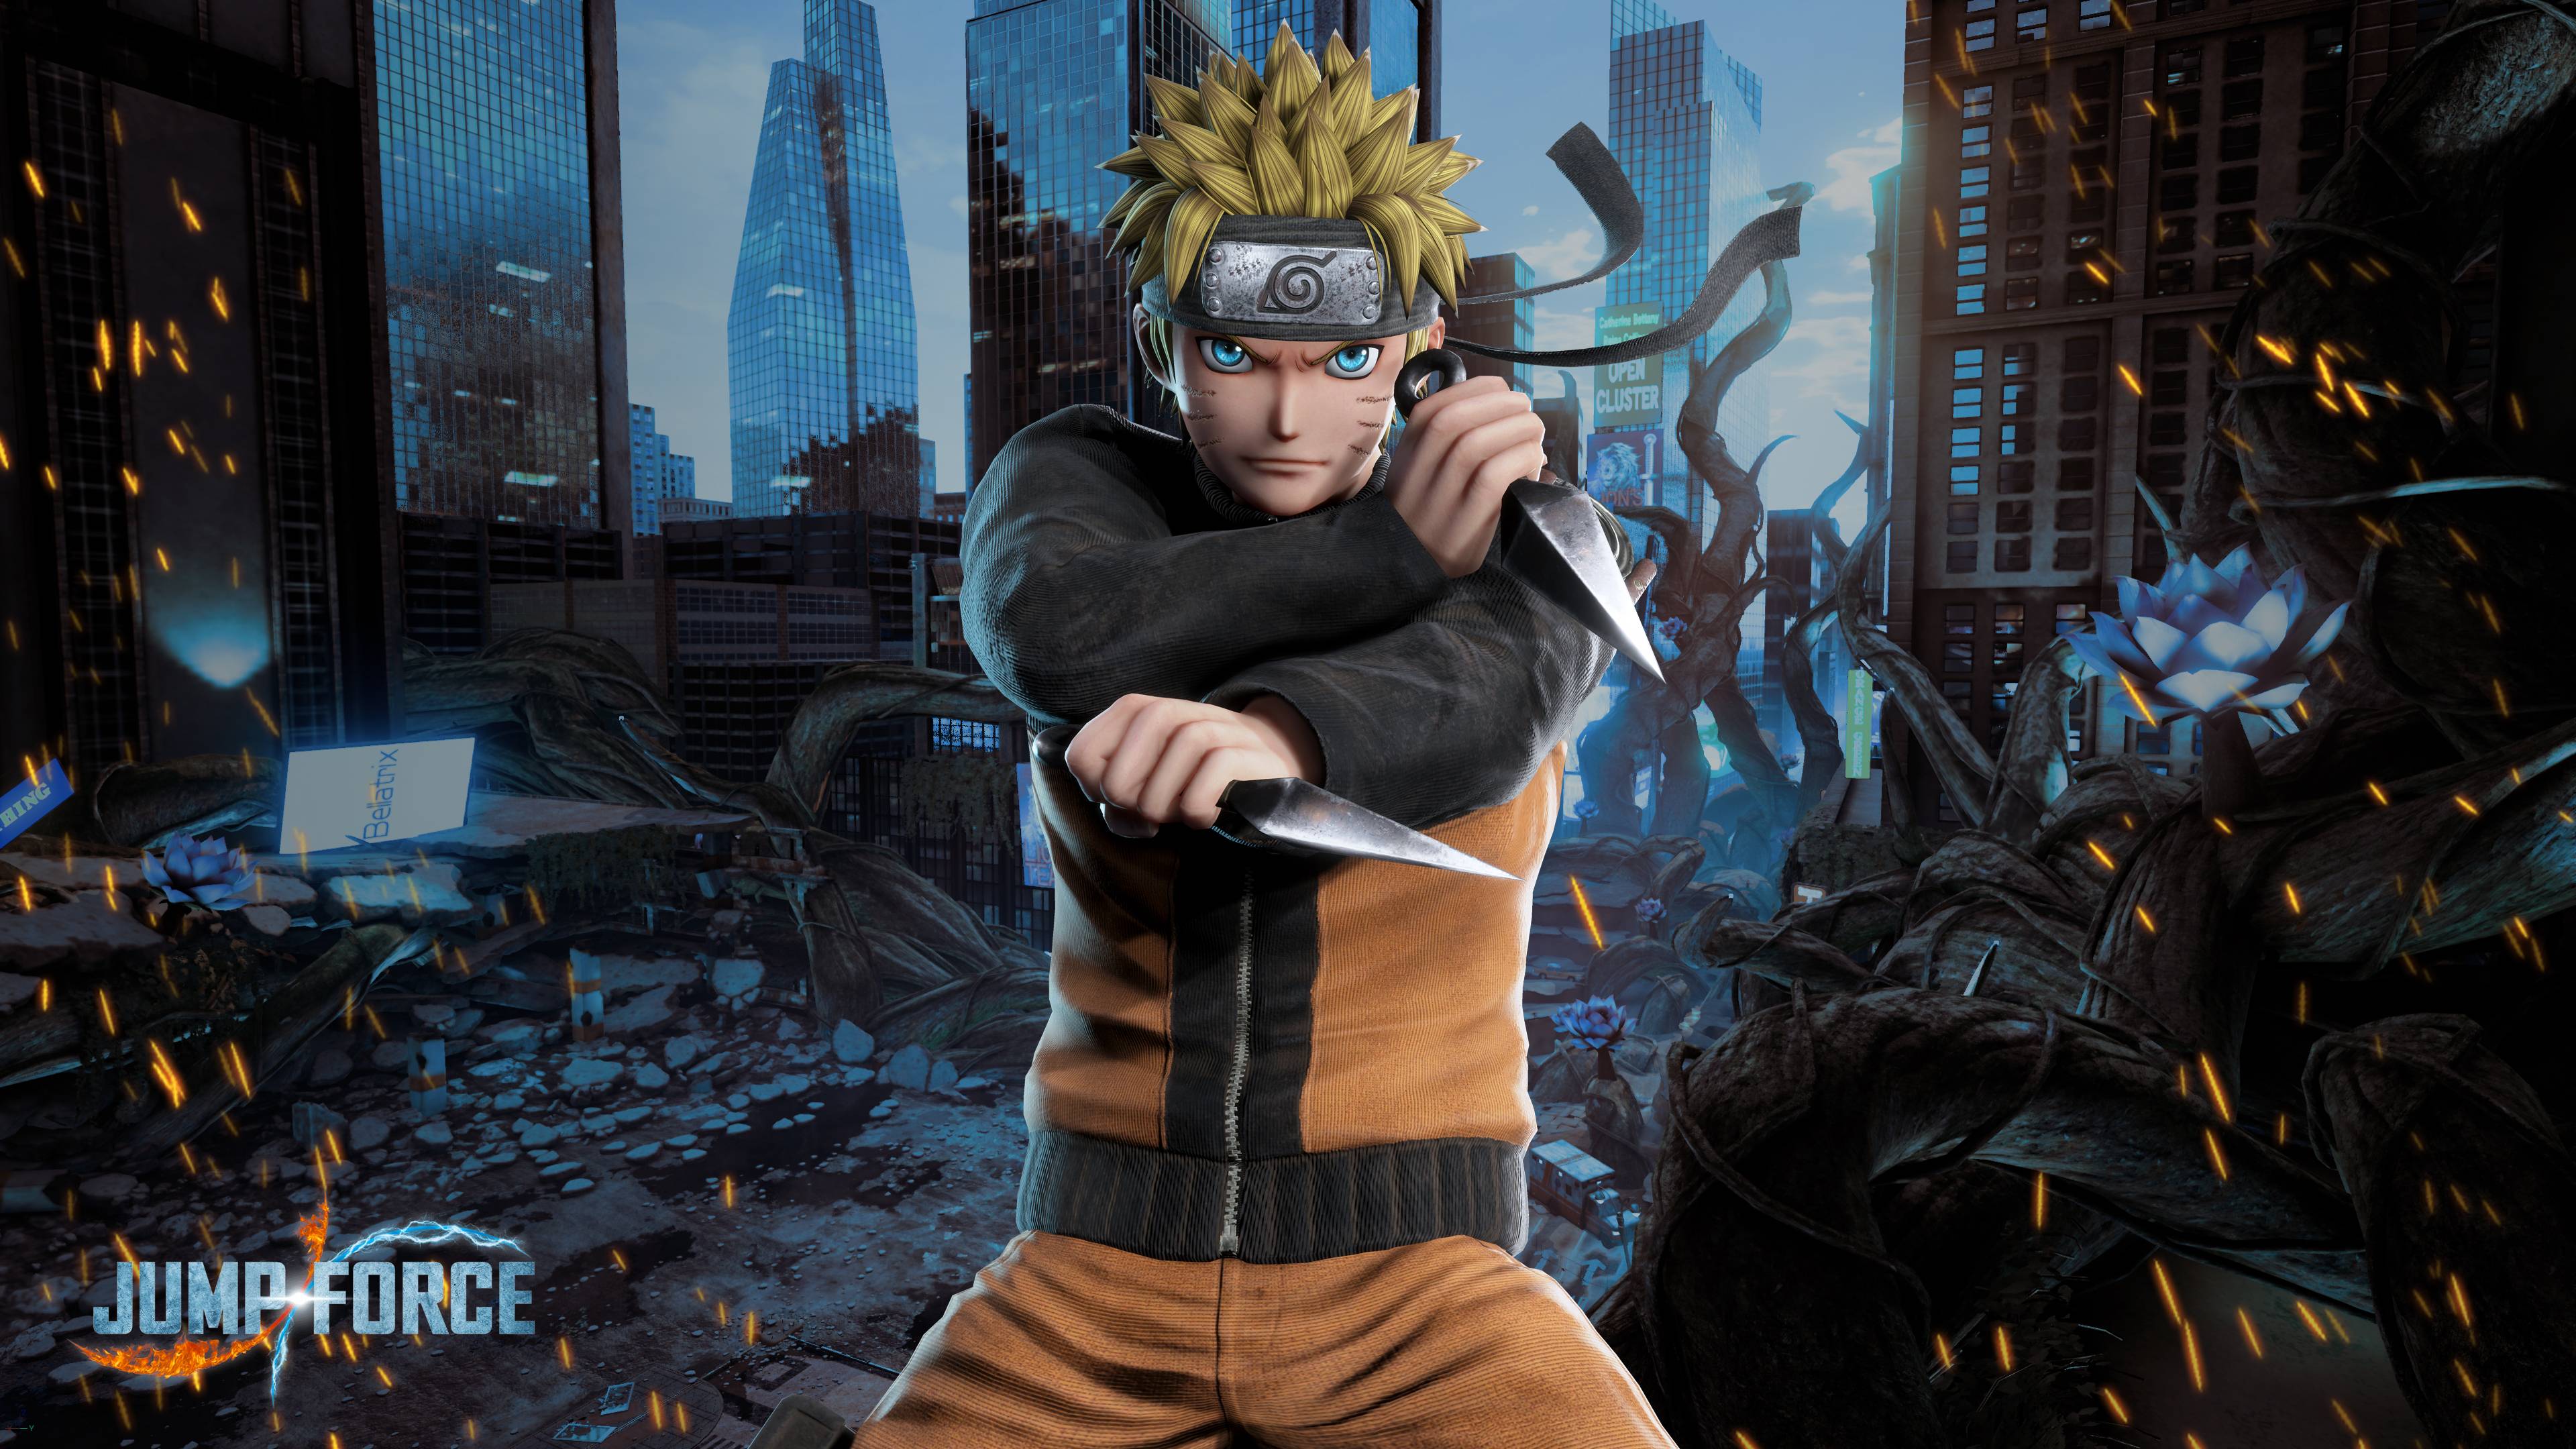 jump force pc full version